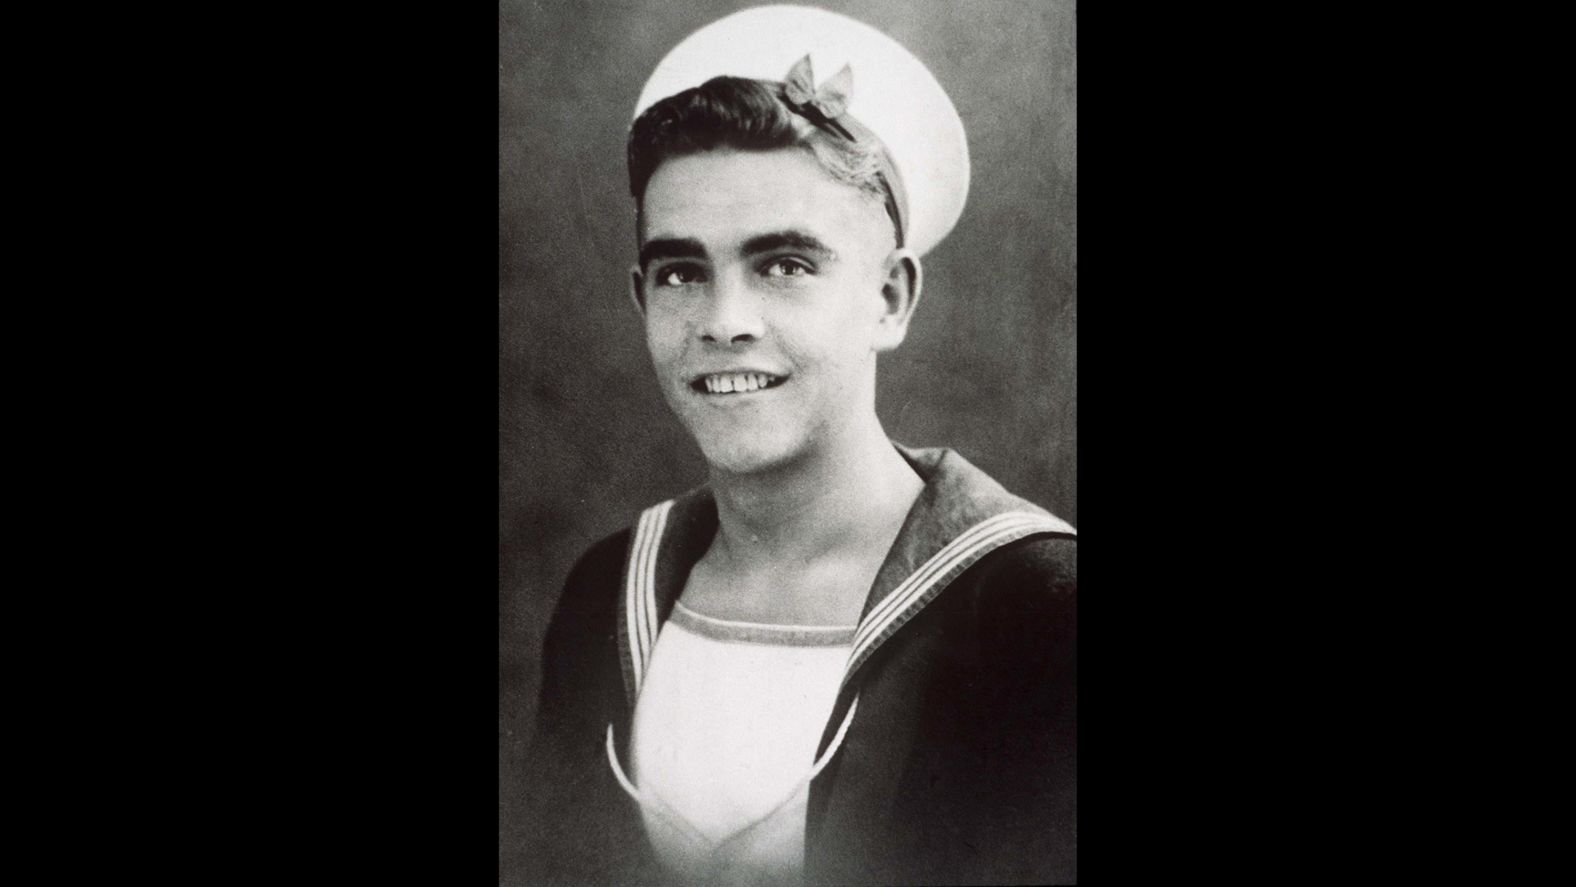 A young Connery poses for a photo. He quit school in his early teens and enlisted in the military.